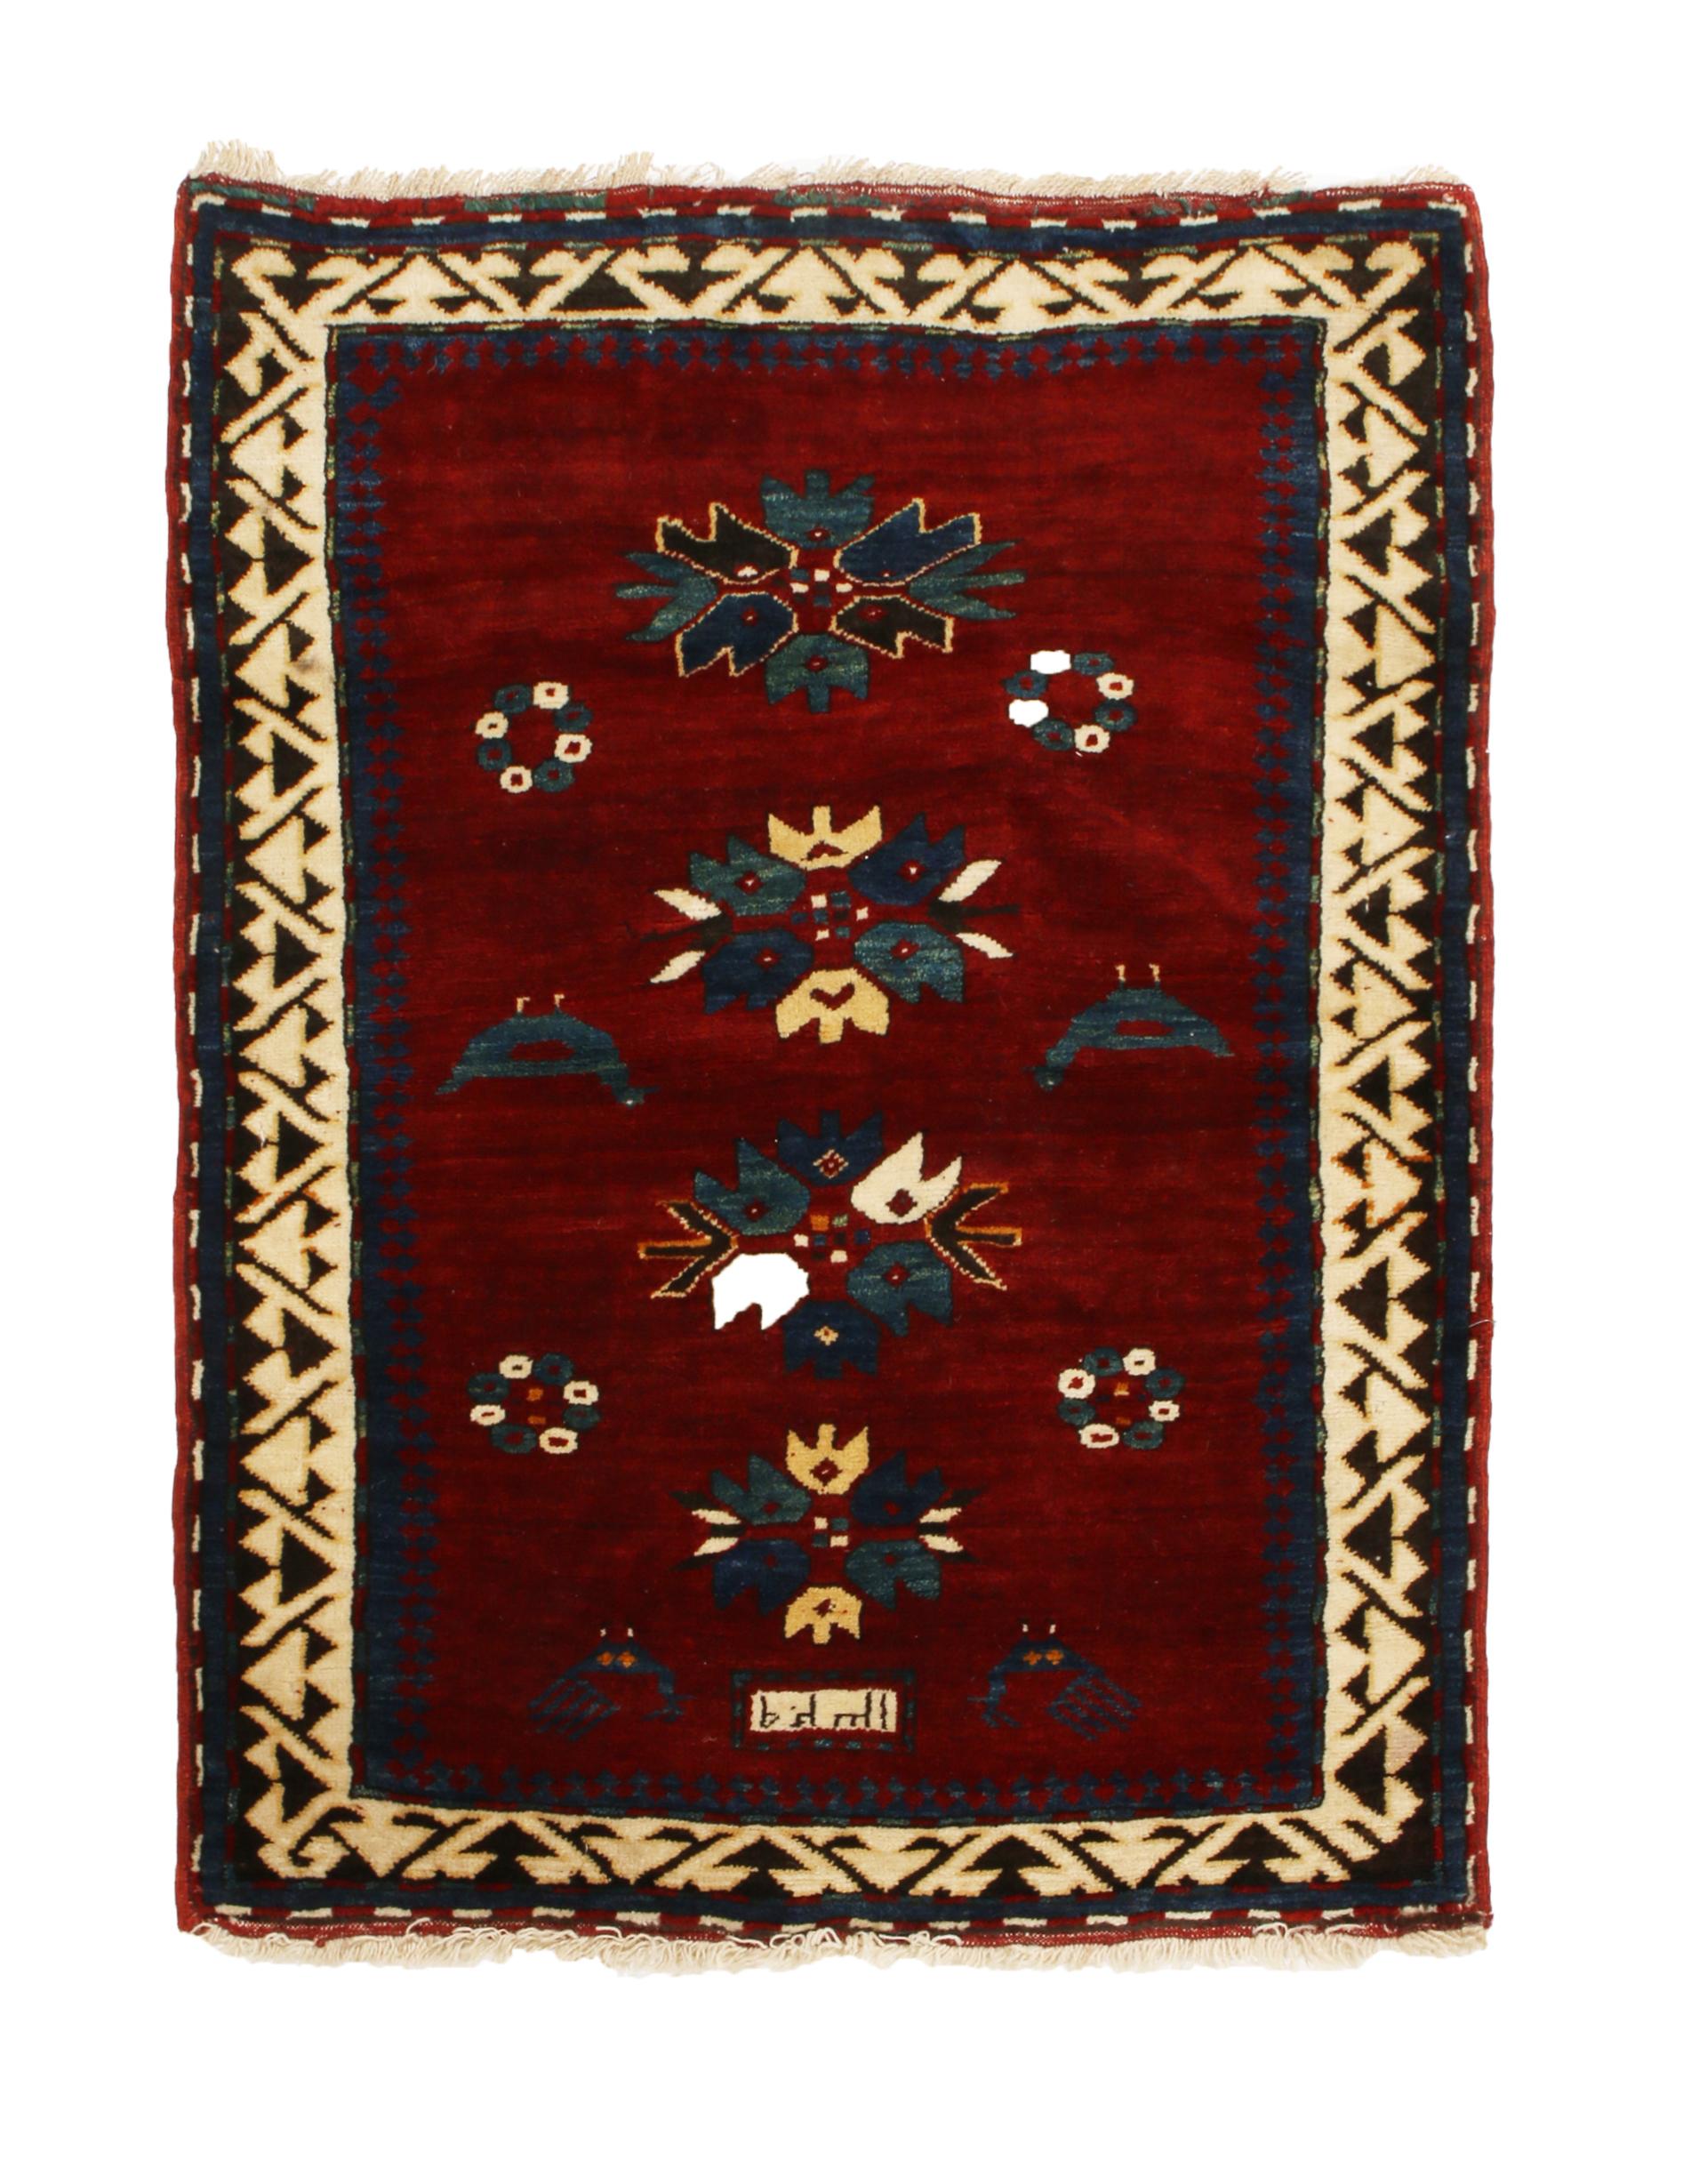 Hailing from Russia between 1890-1900, this hand knotted antique Kazak wool rug is a signature piece employing traditional tribal colorways in a crimson red background with beige and royal blue floral motifs. It is especially uncommon to see this